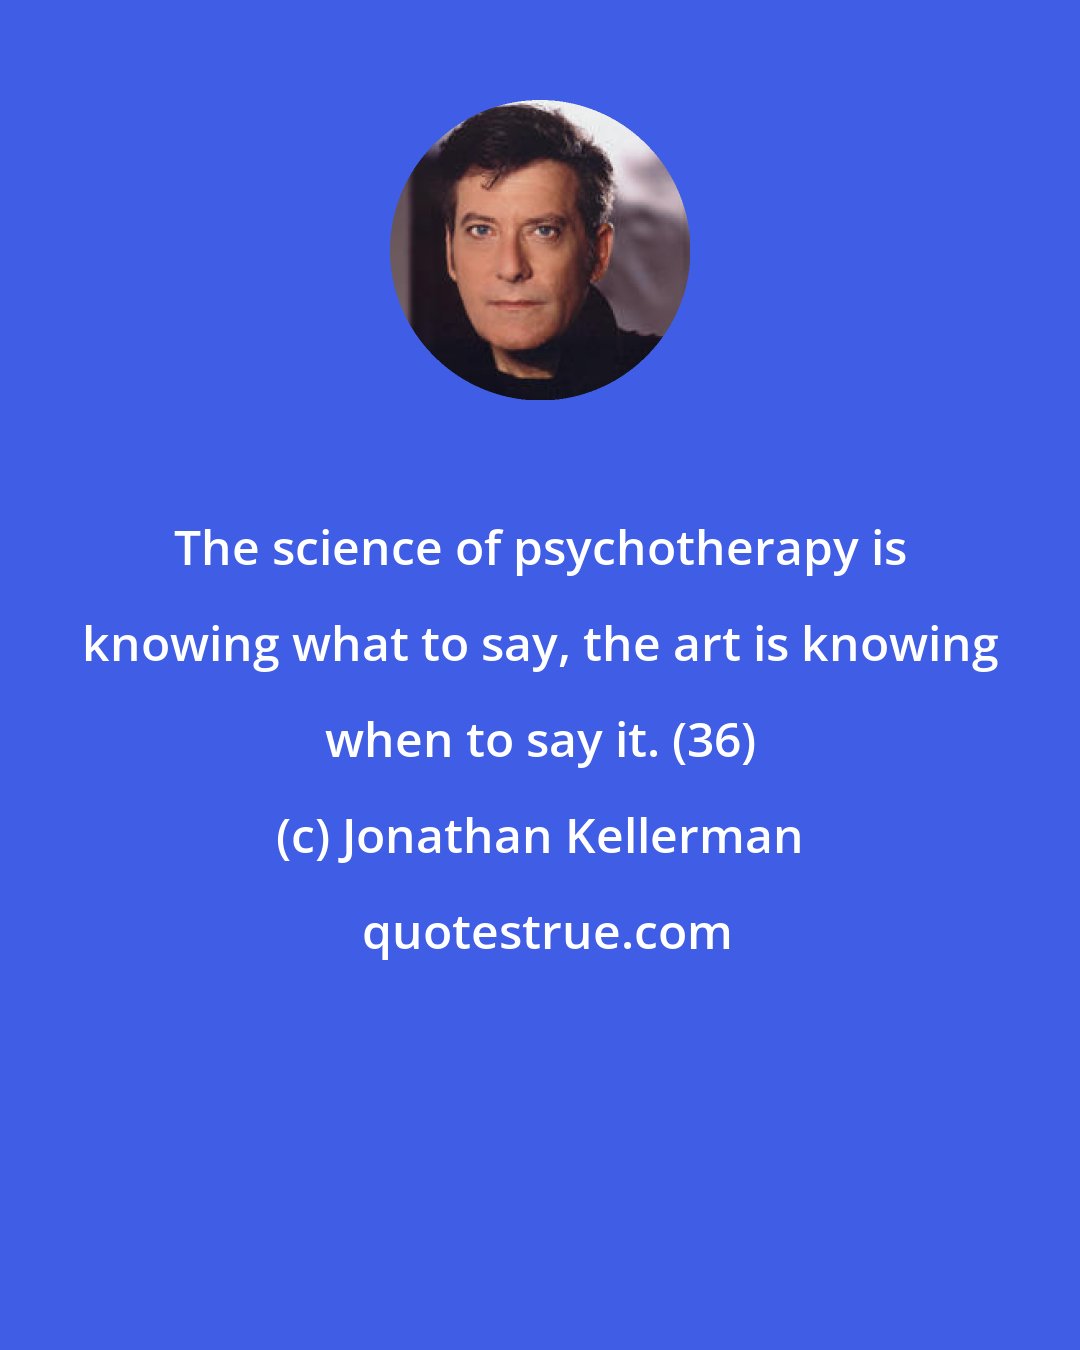 Jonathan Kellerman: The science of psychotherapy is knowing what to say, the art is knowing when to say it. (36)